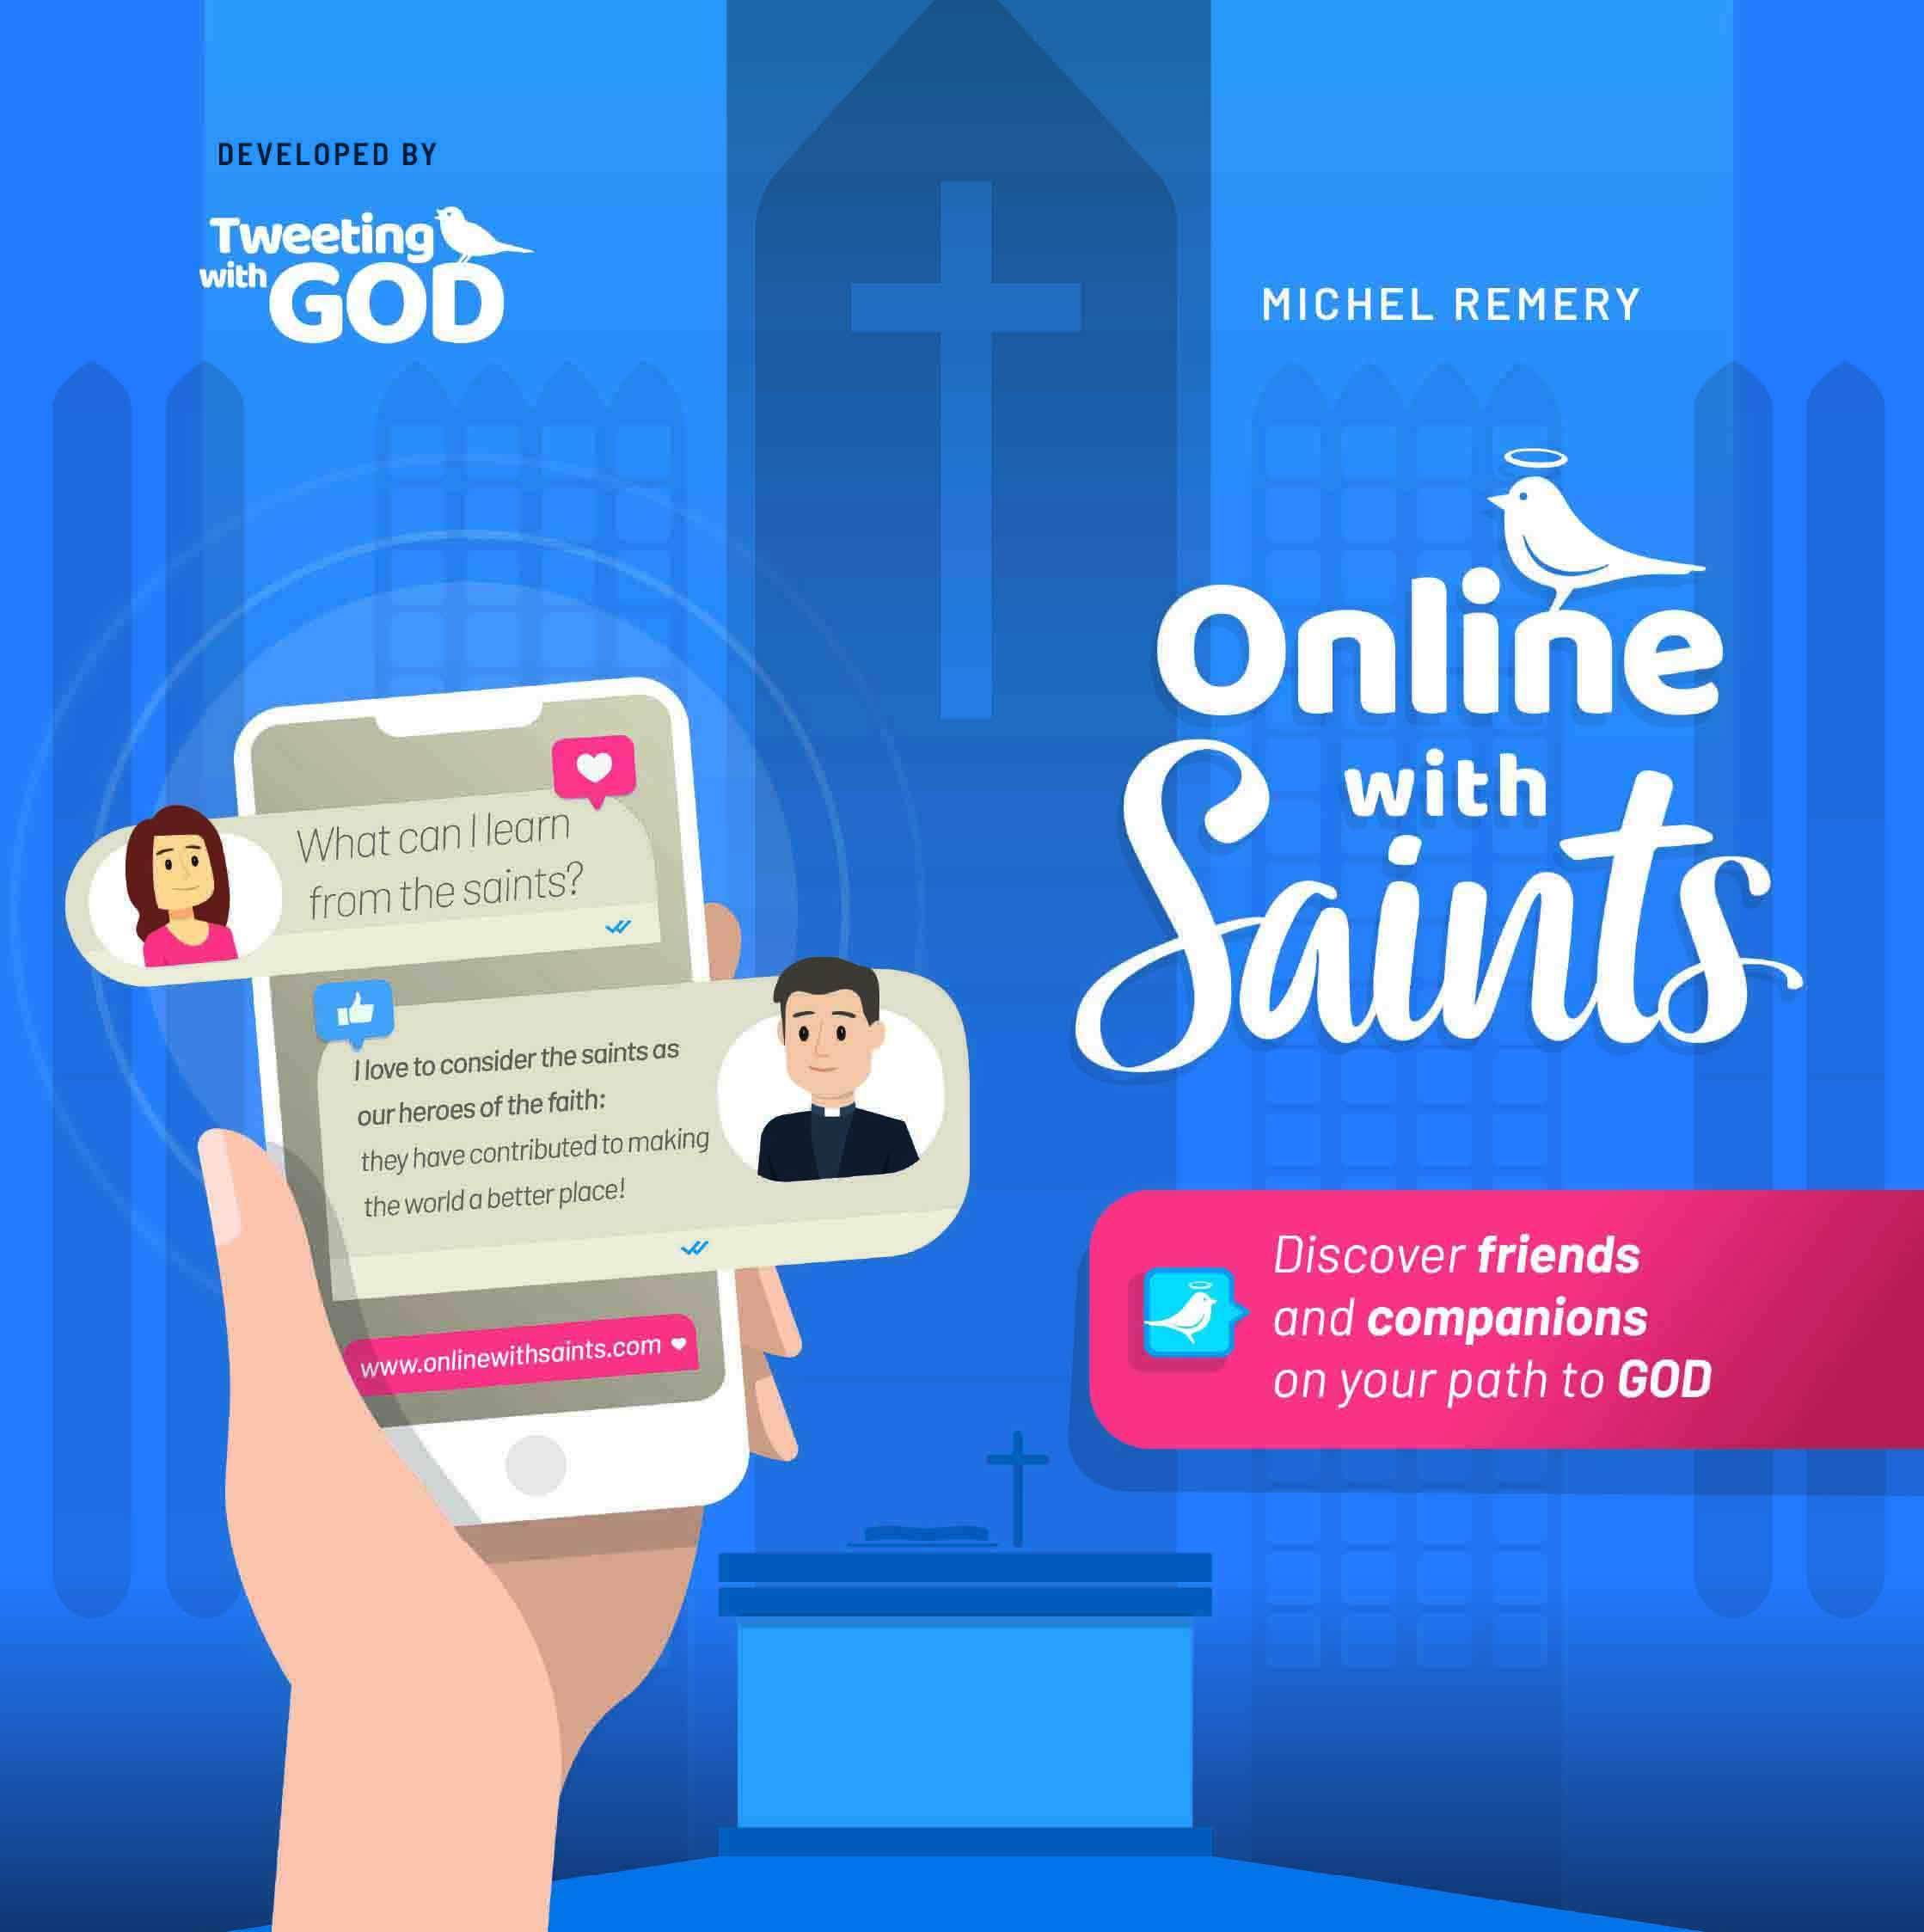 Online with Saints Discover friends and companions on your path to God